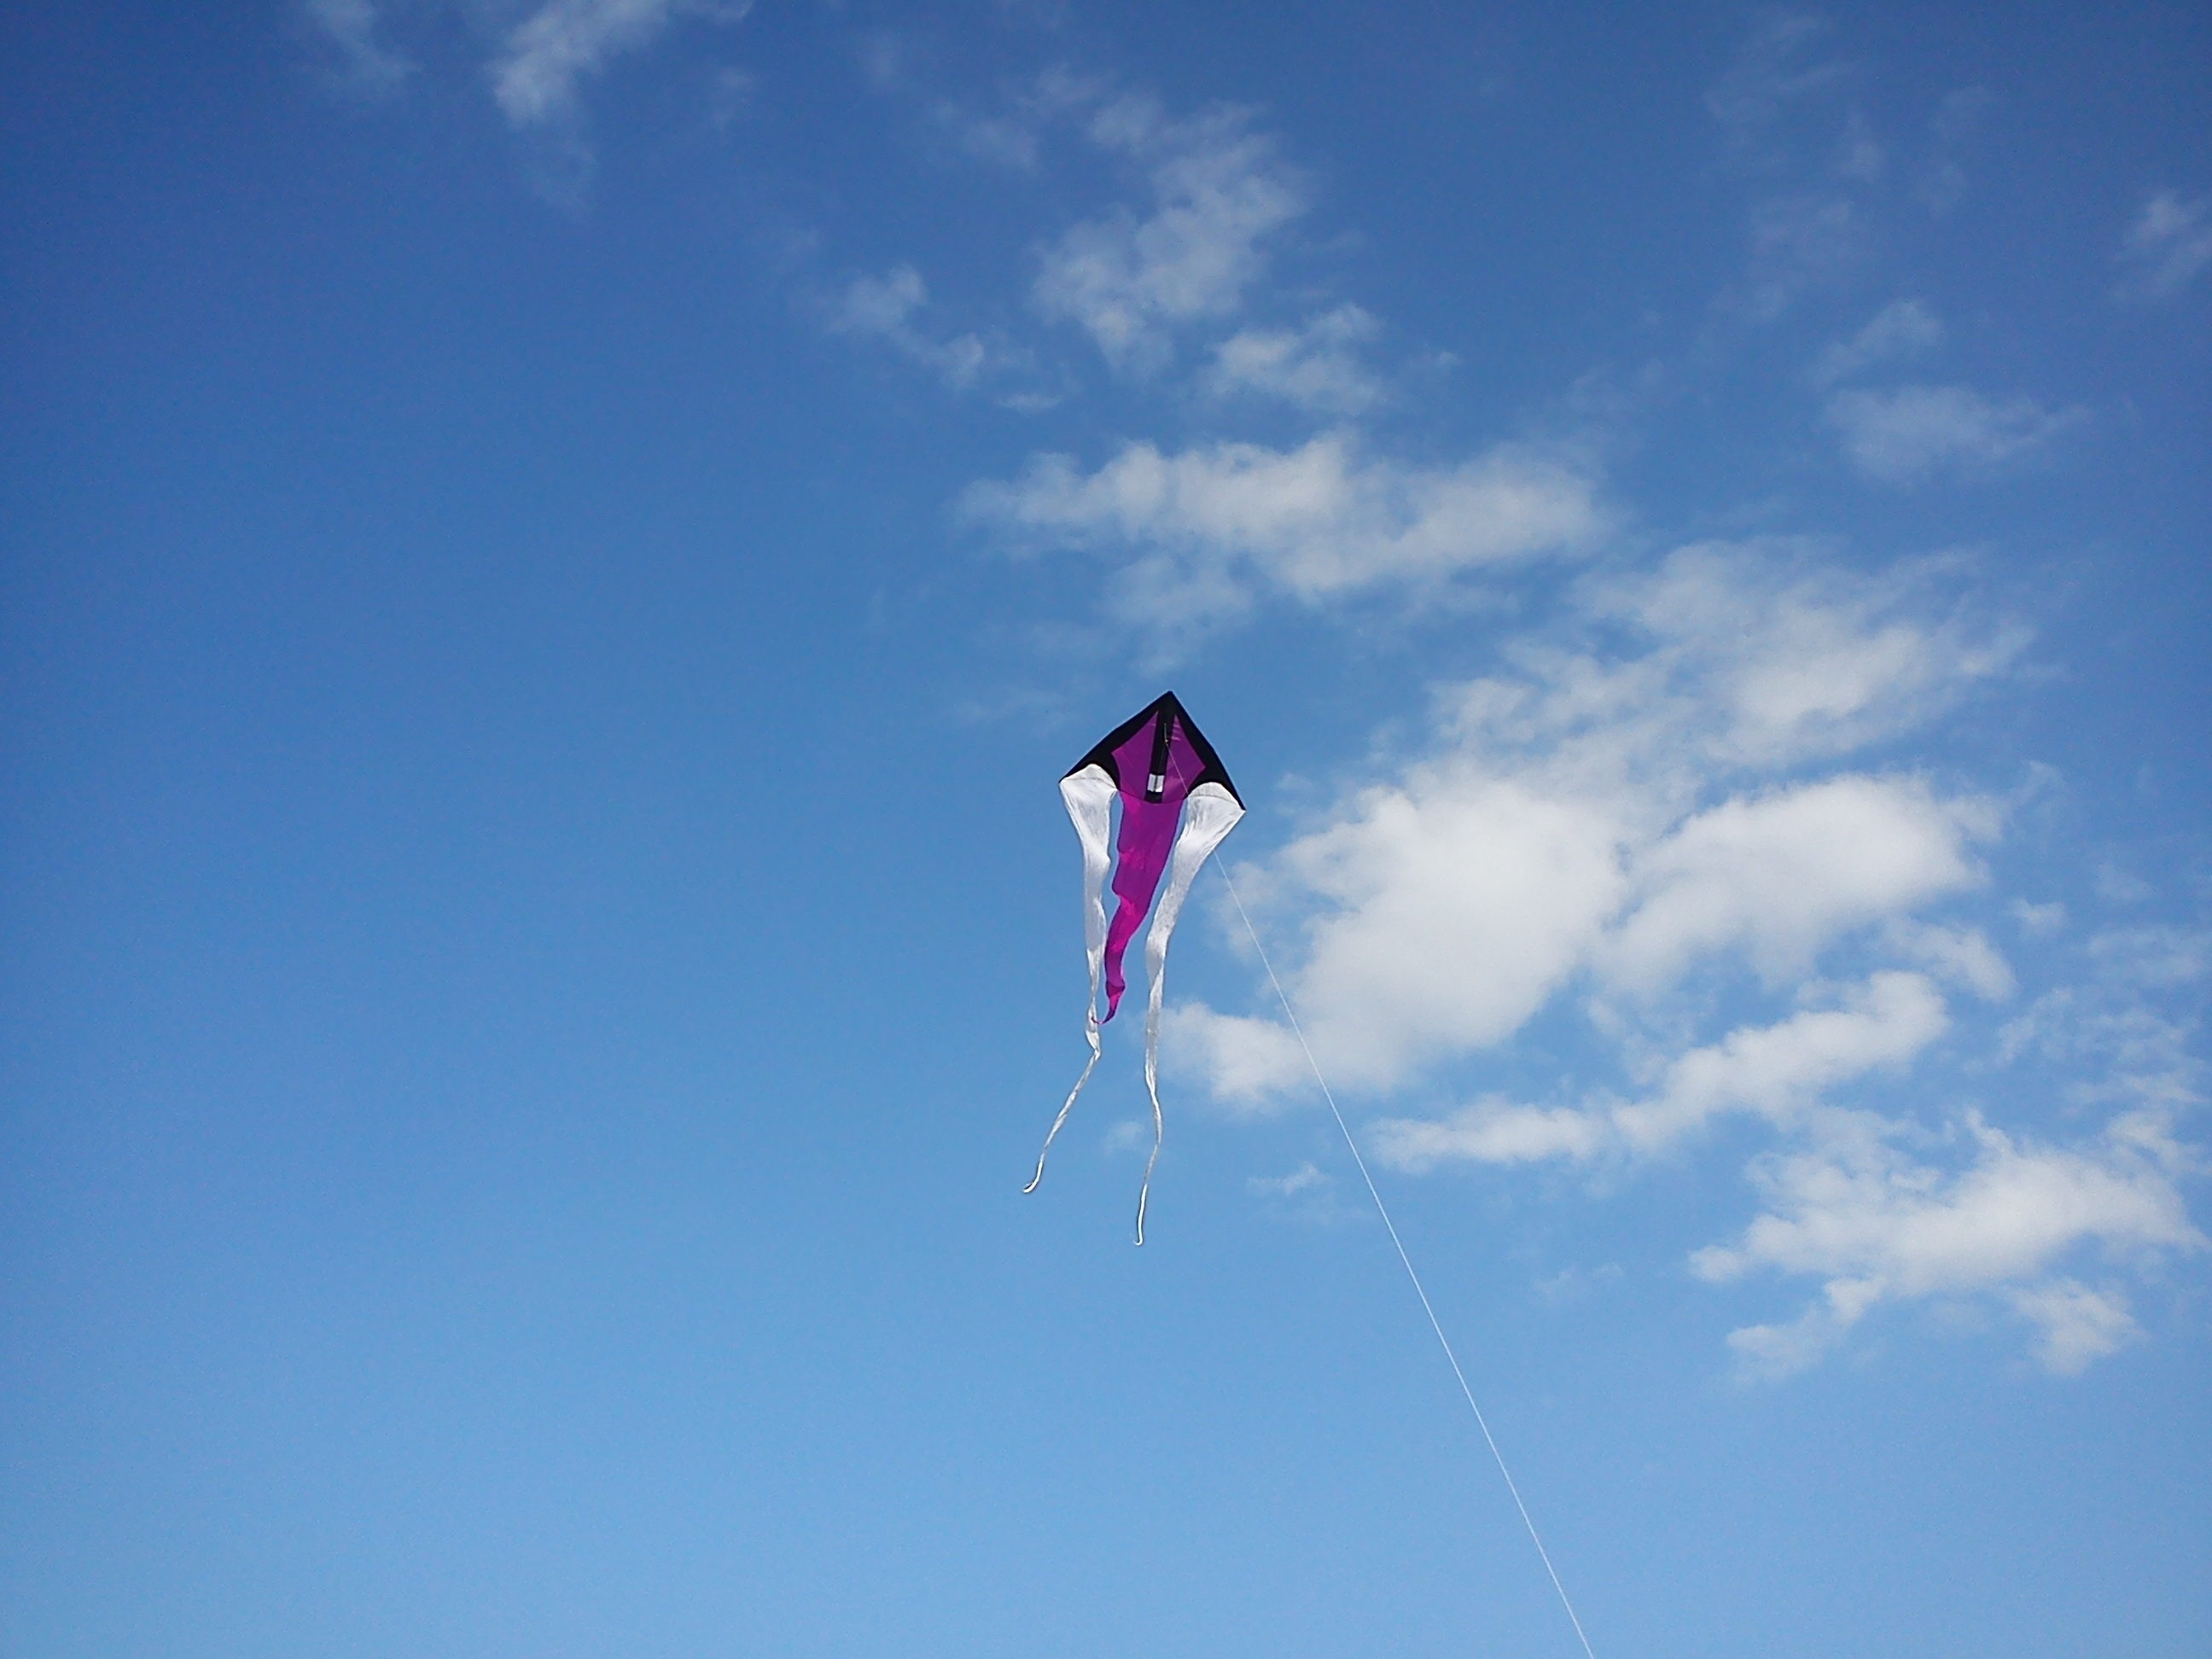 Kite Sports: Kite rise, Deltas, Stable, Easy to handle, Wonderful flyers, Fun. 2600x1950 HD Wallpaper.